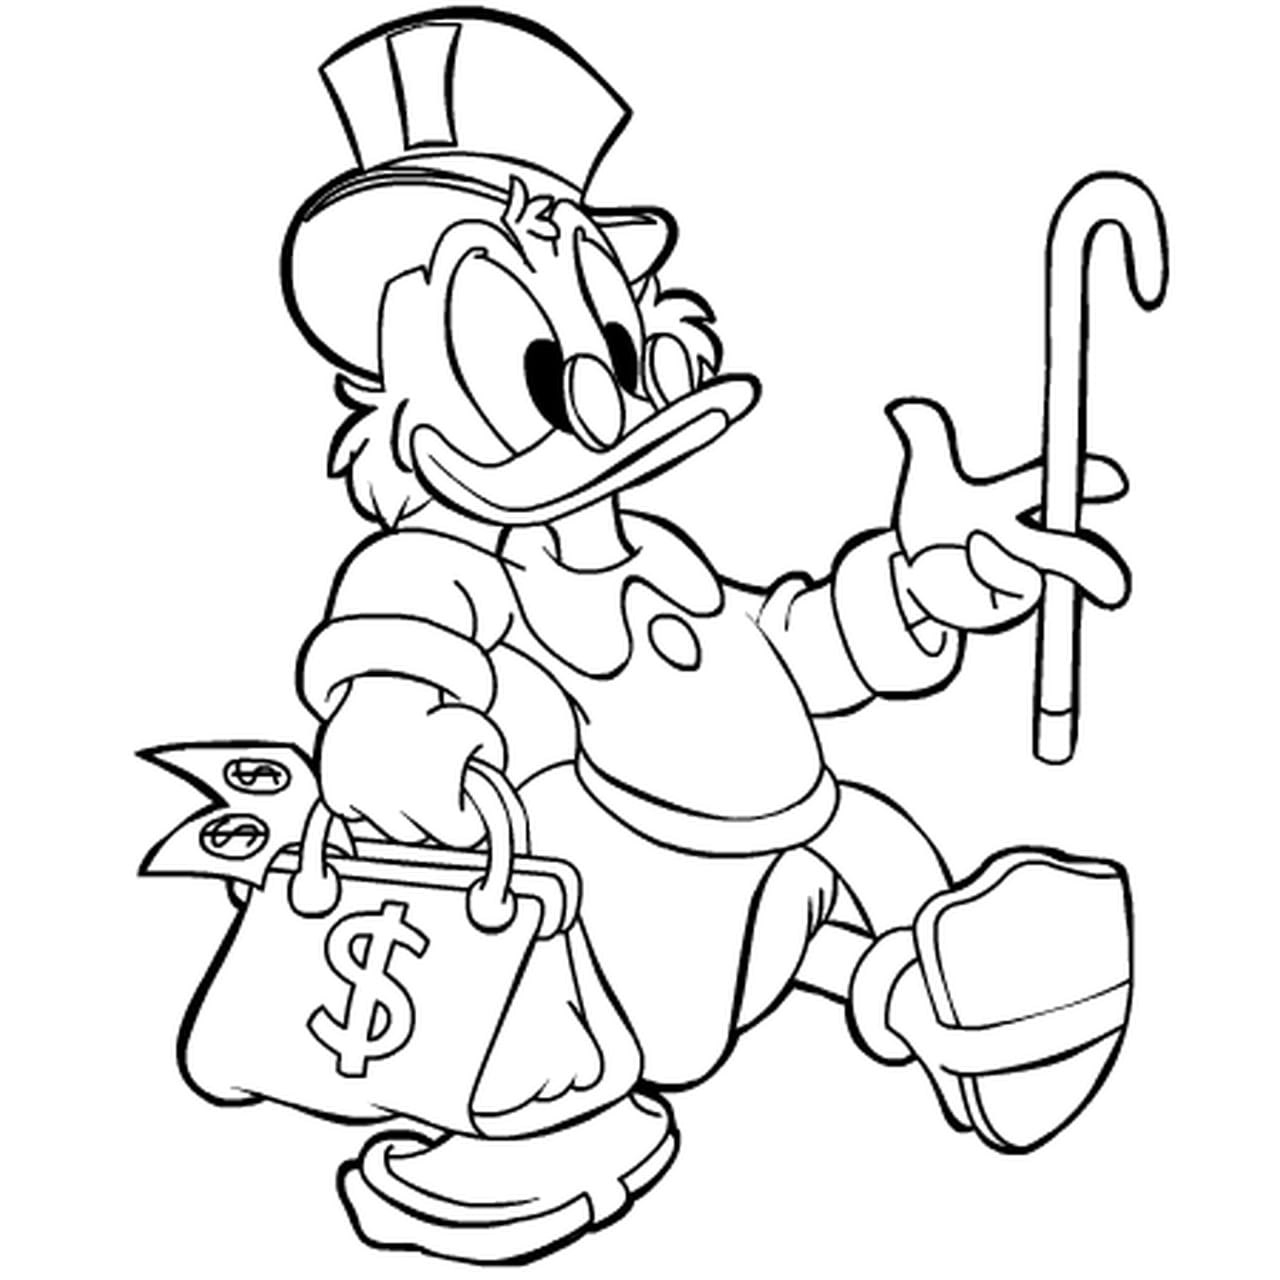 Scrooge mcduck with money #4